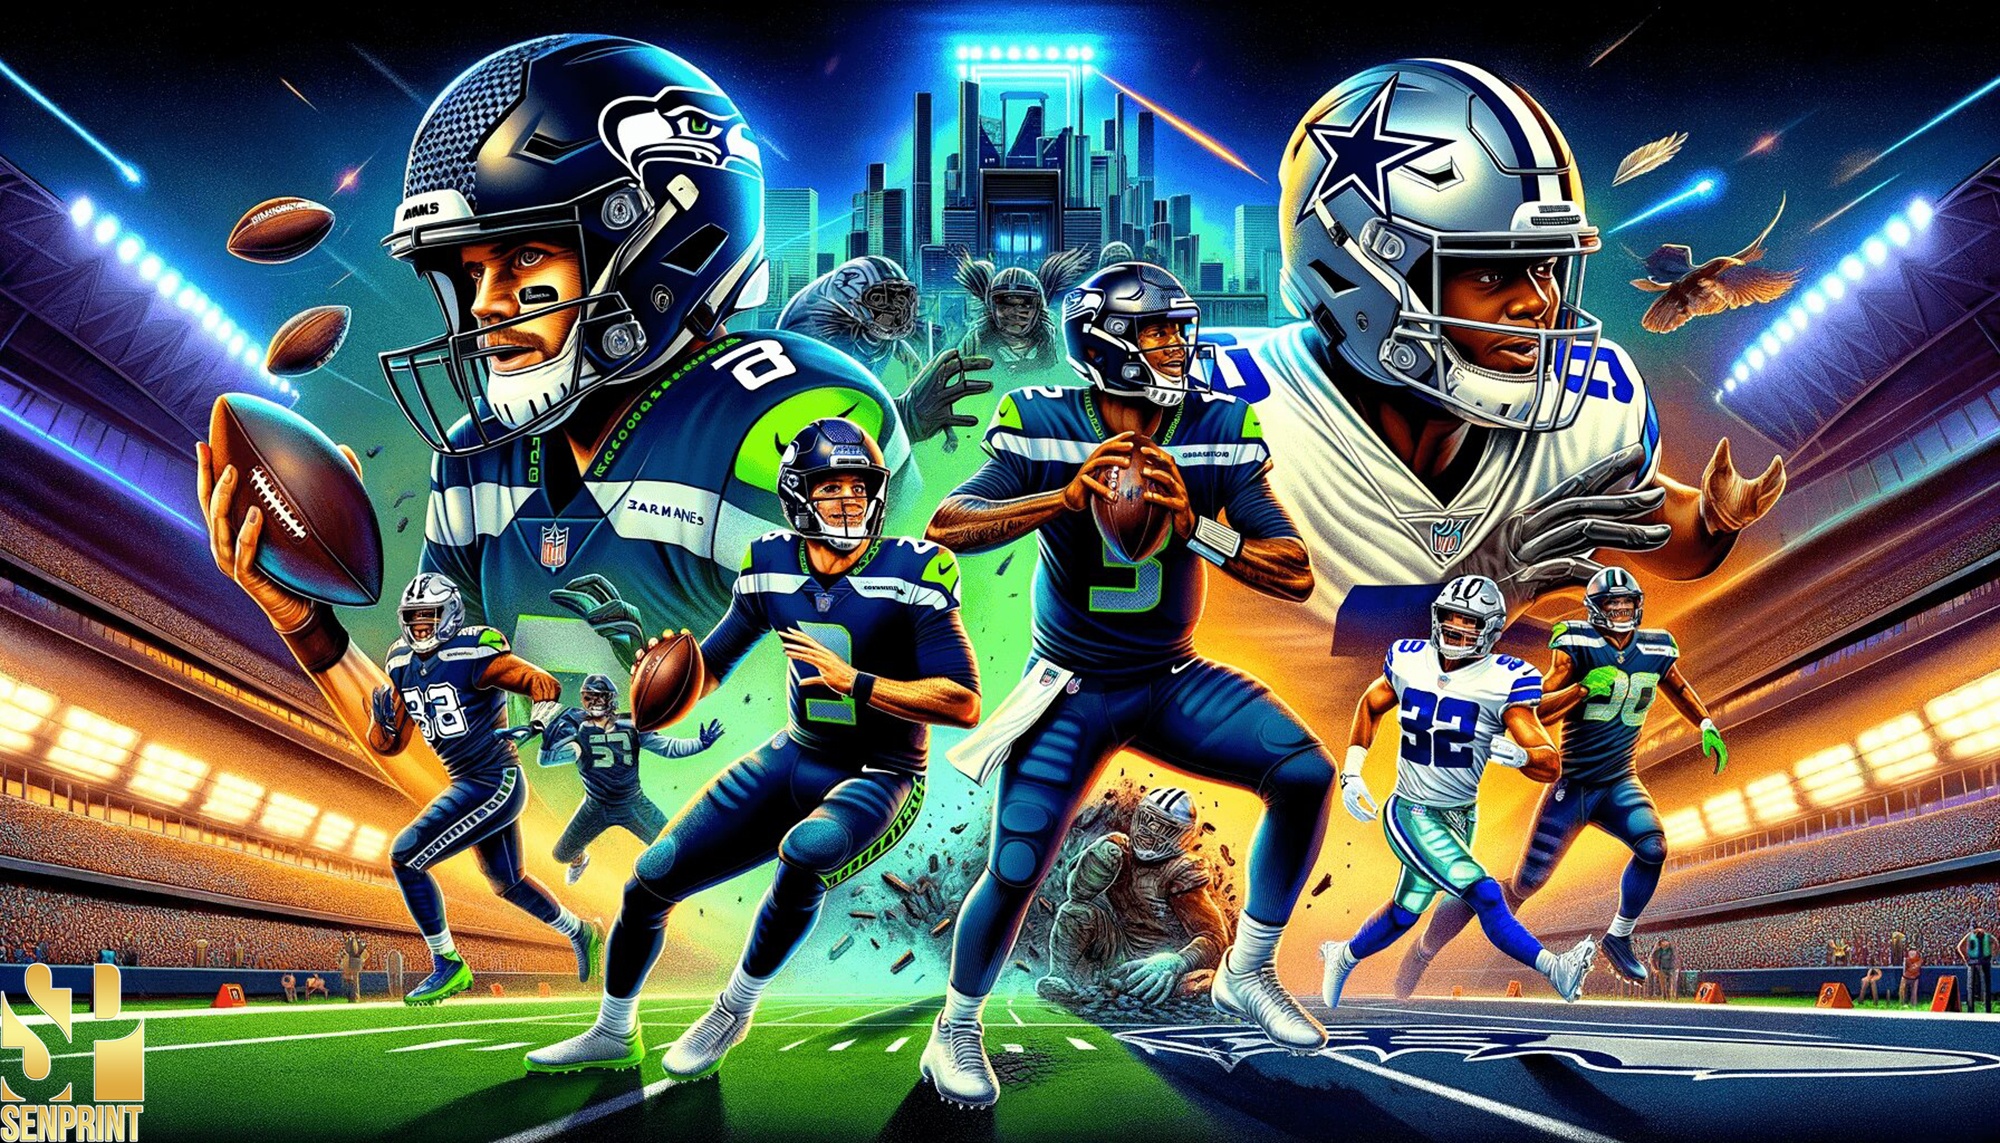 Super Bowl LVII Showdown: The Cowboys and Seahawks' Thrilling Duel for Glory